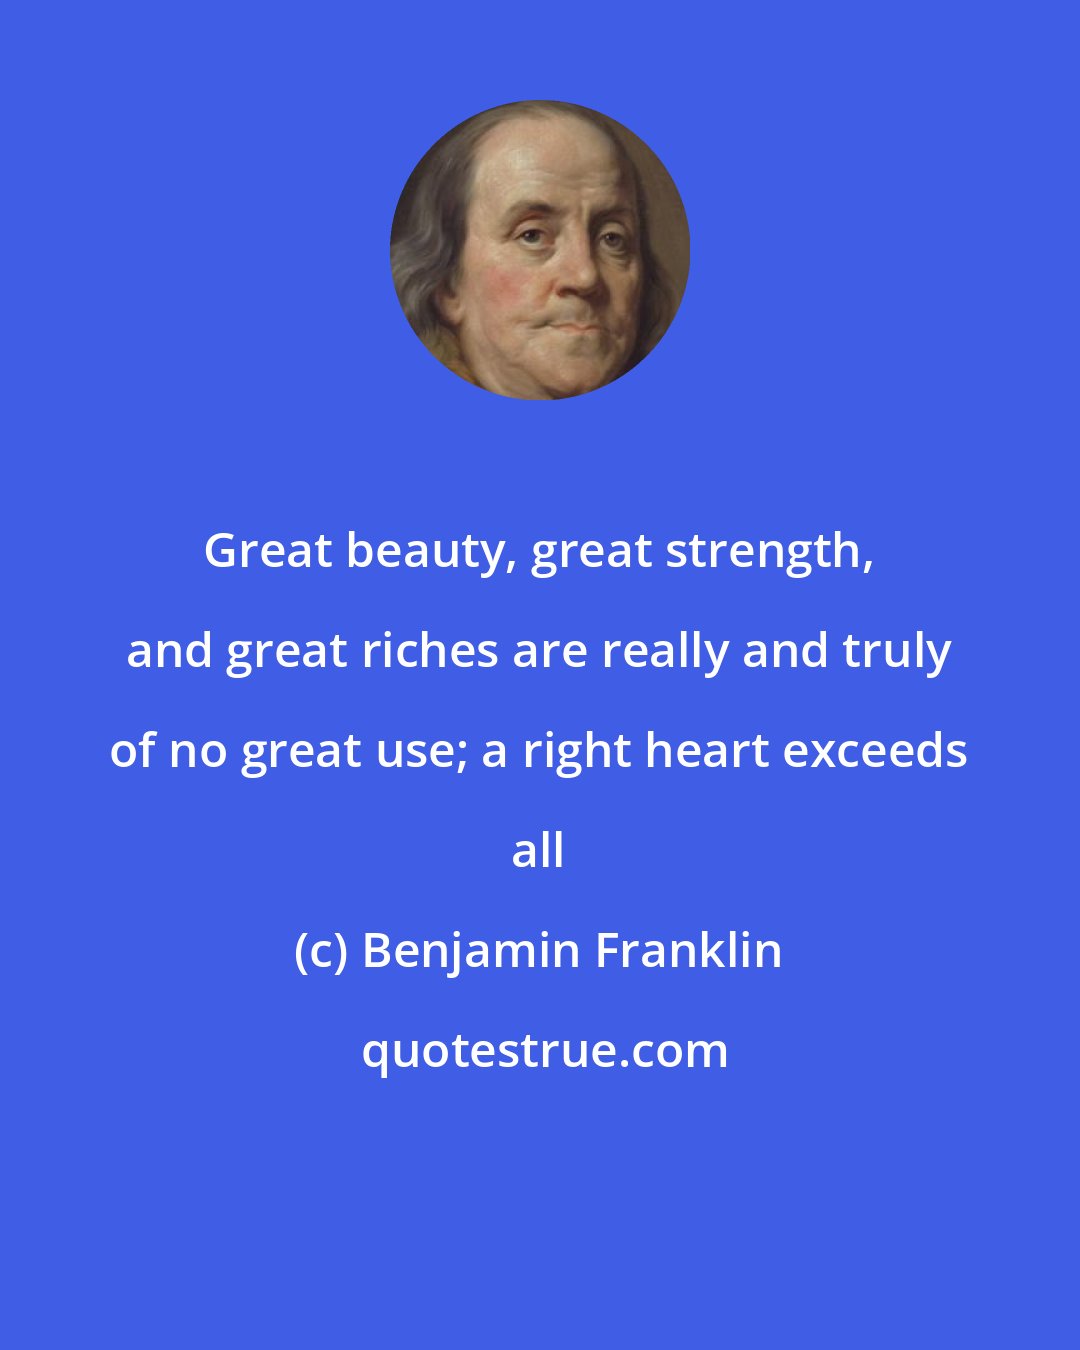 Benjamin Franklin: Great beauty, great strength, and great riches are really and truly of no great use; a right heart exceeds all